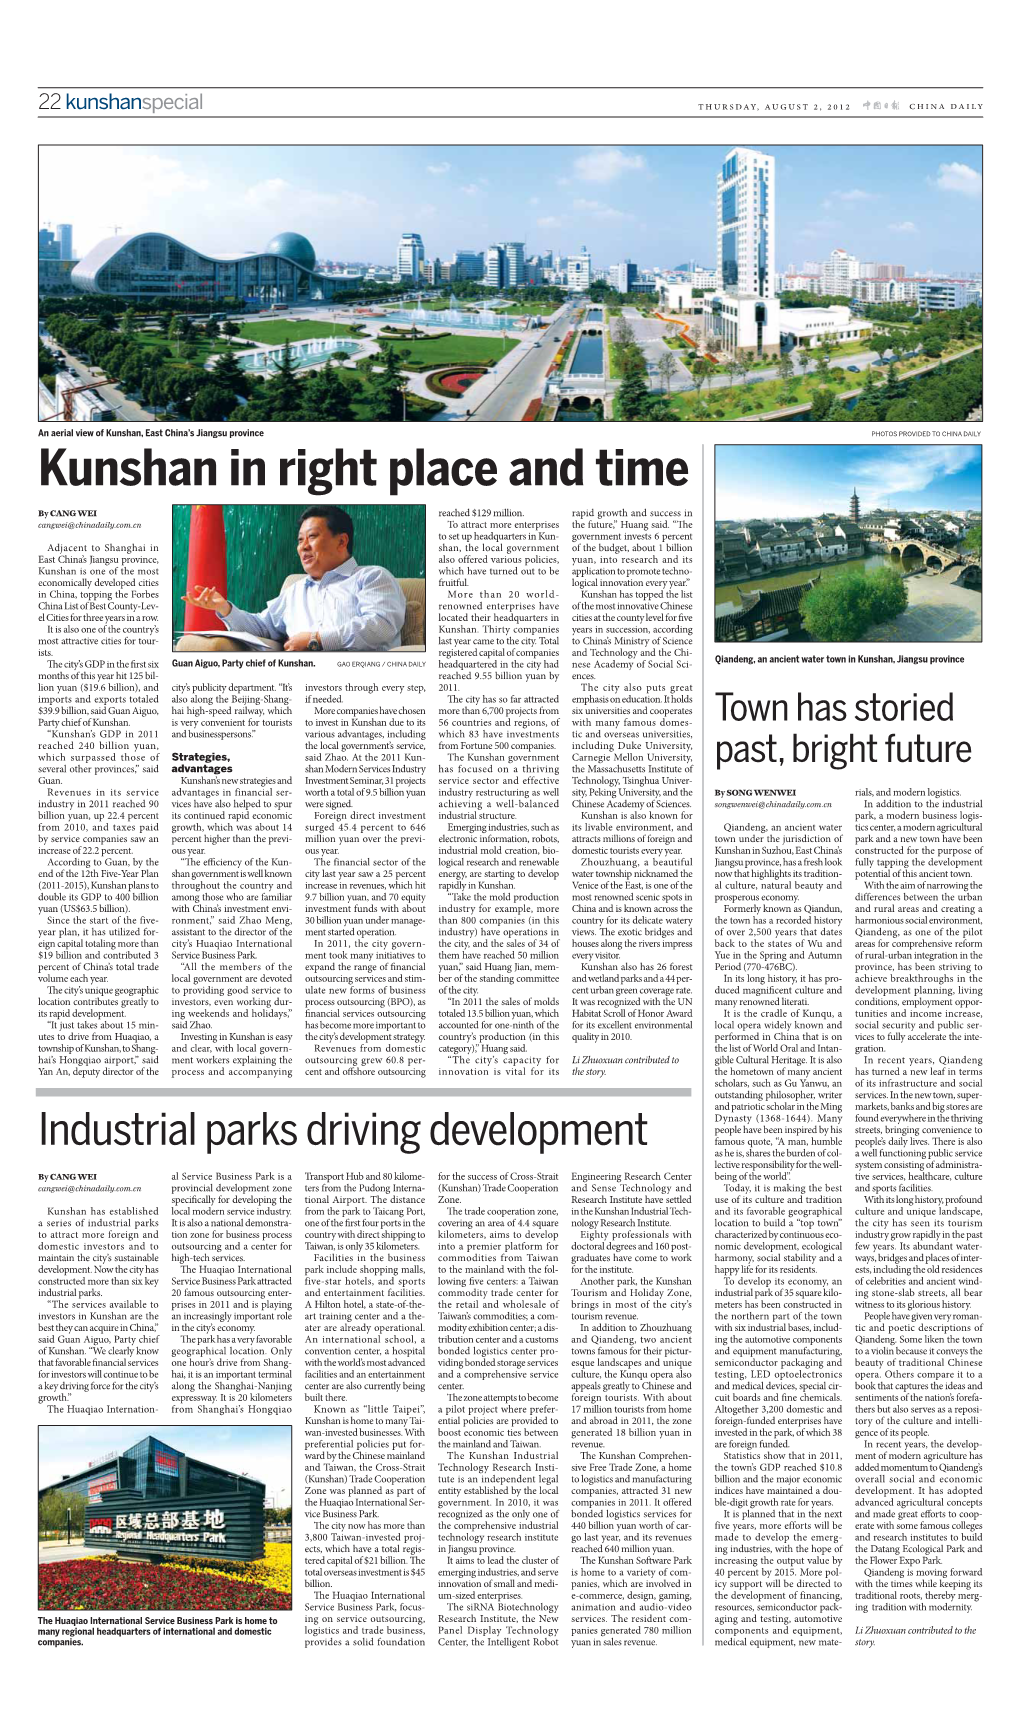 Kunshan in Right Place and Time